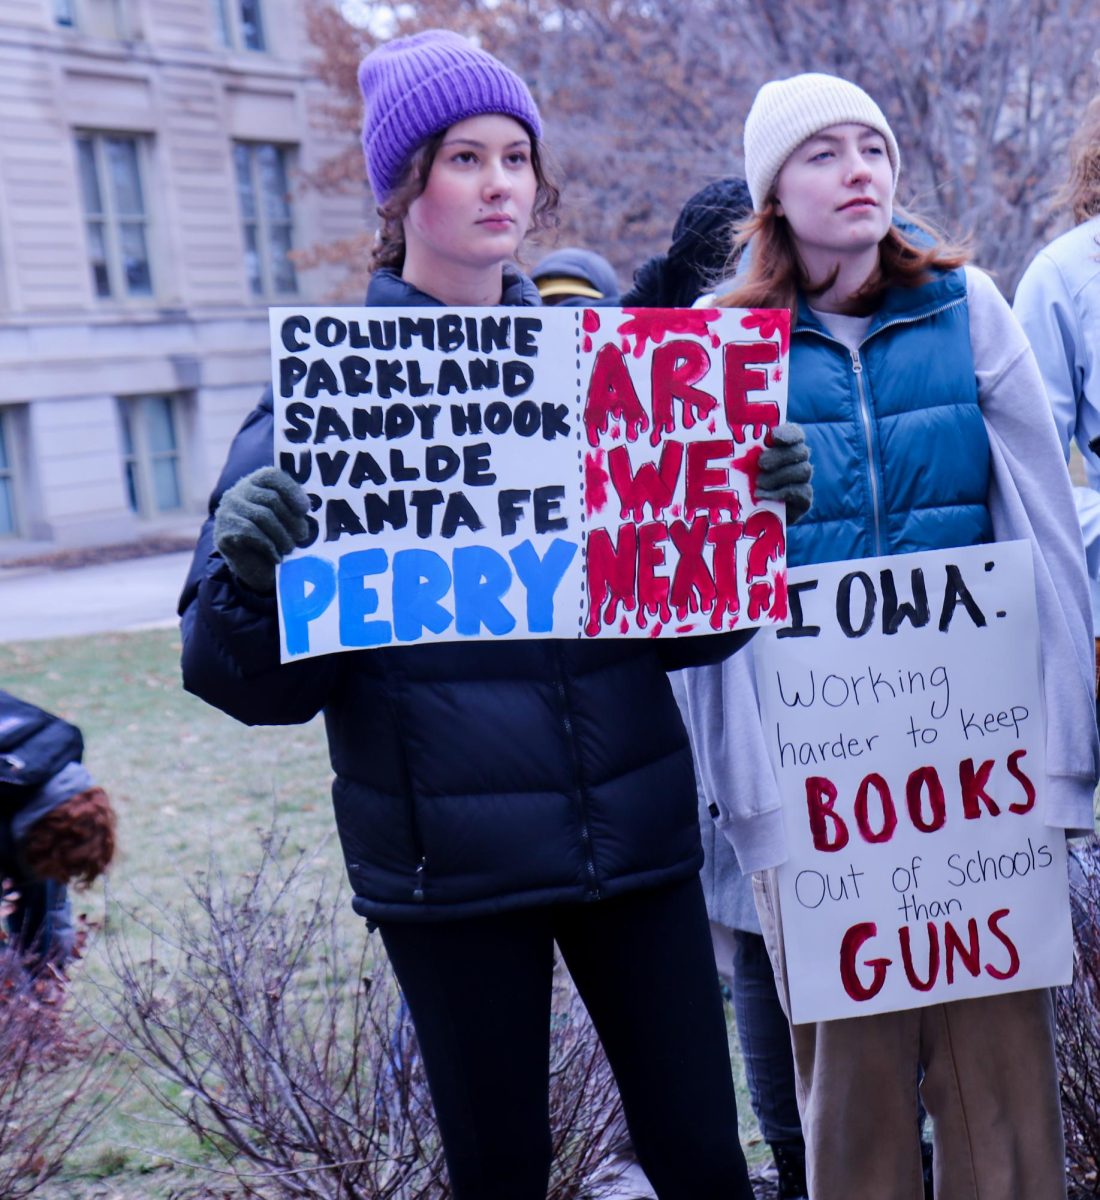 City High students hold up signs in the front row of the protest on Jan. 8, 2024. There were many signs with messages for the Iowa legislature, such as Working harder to keep books out of schools than guns. 